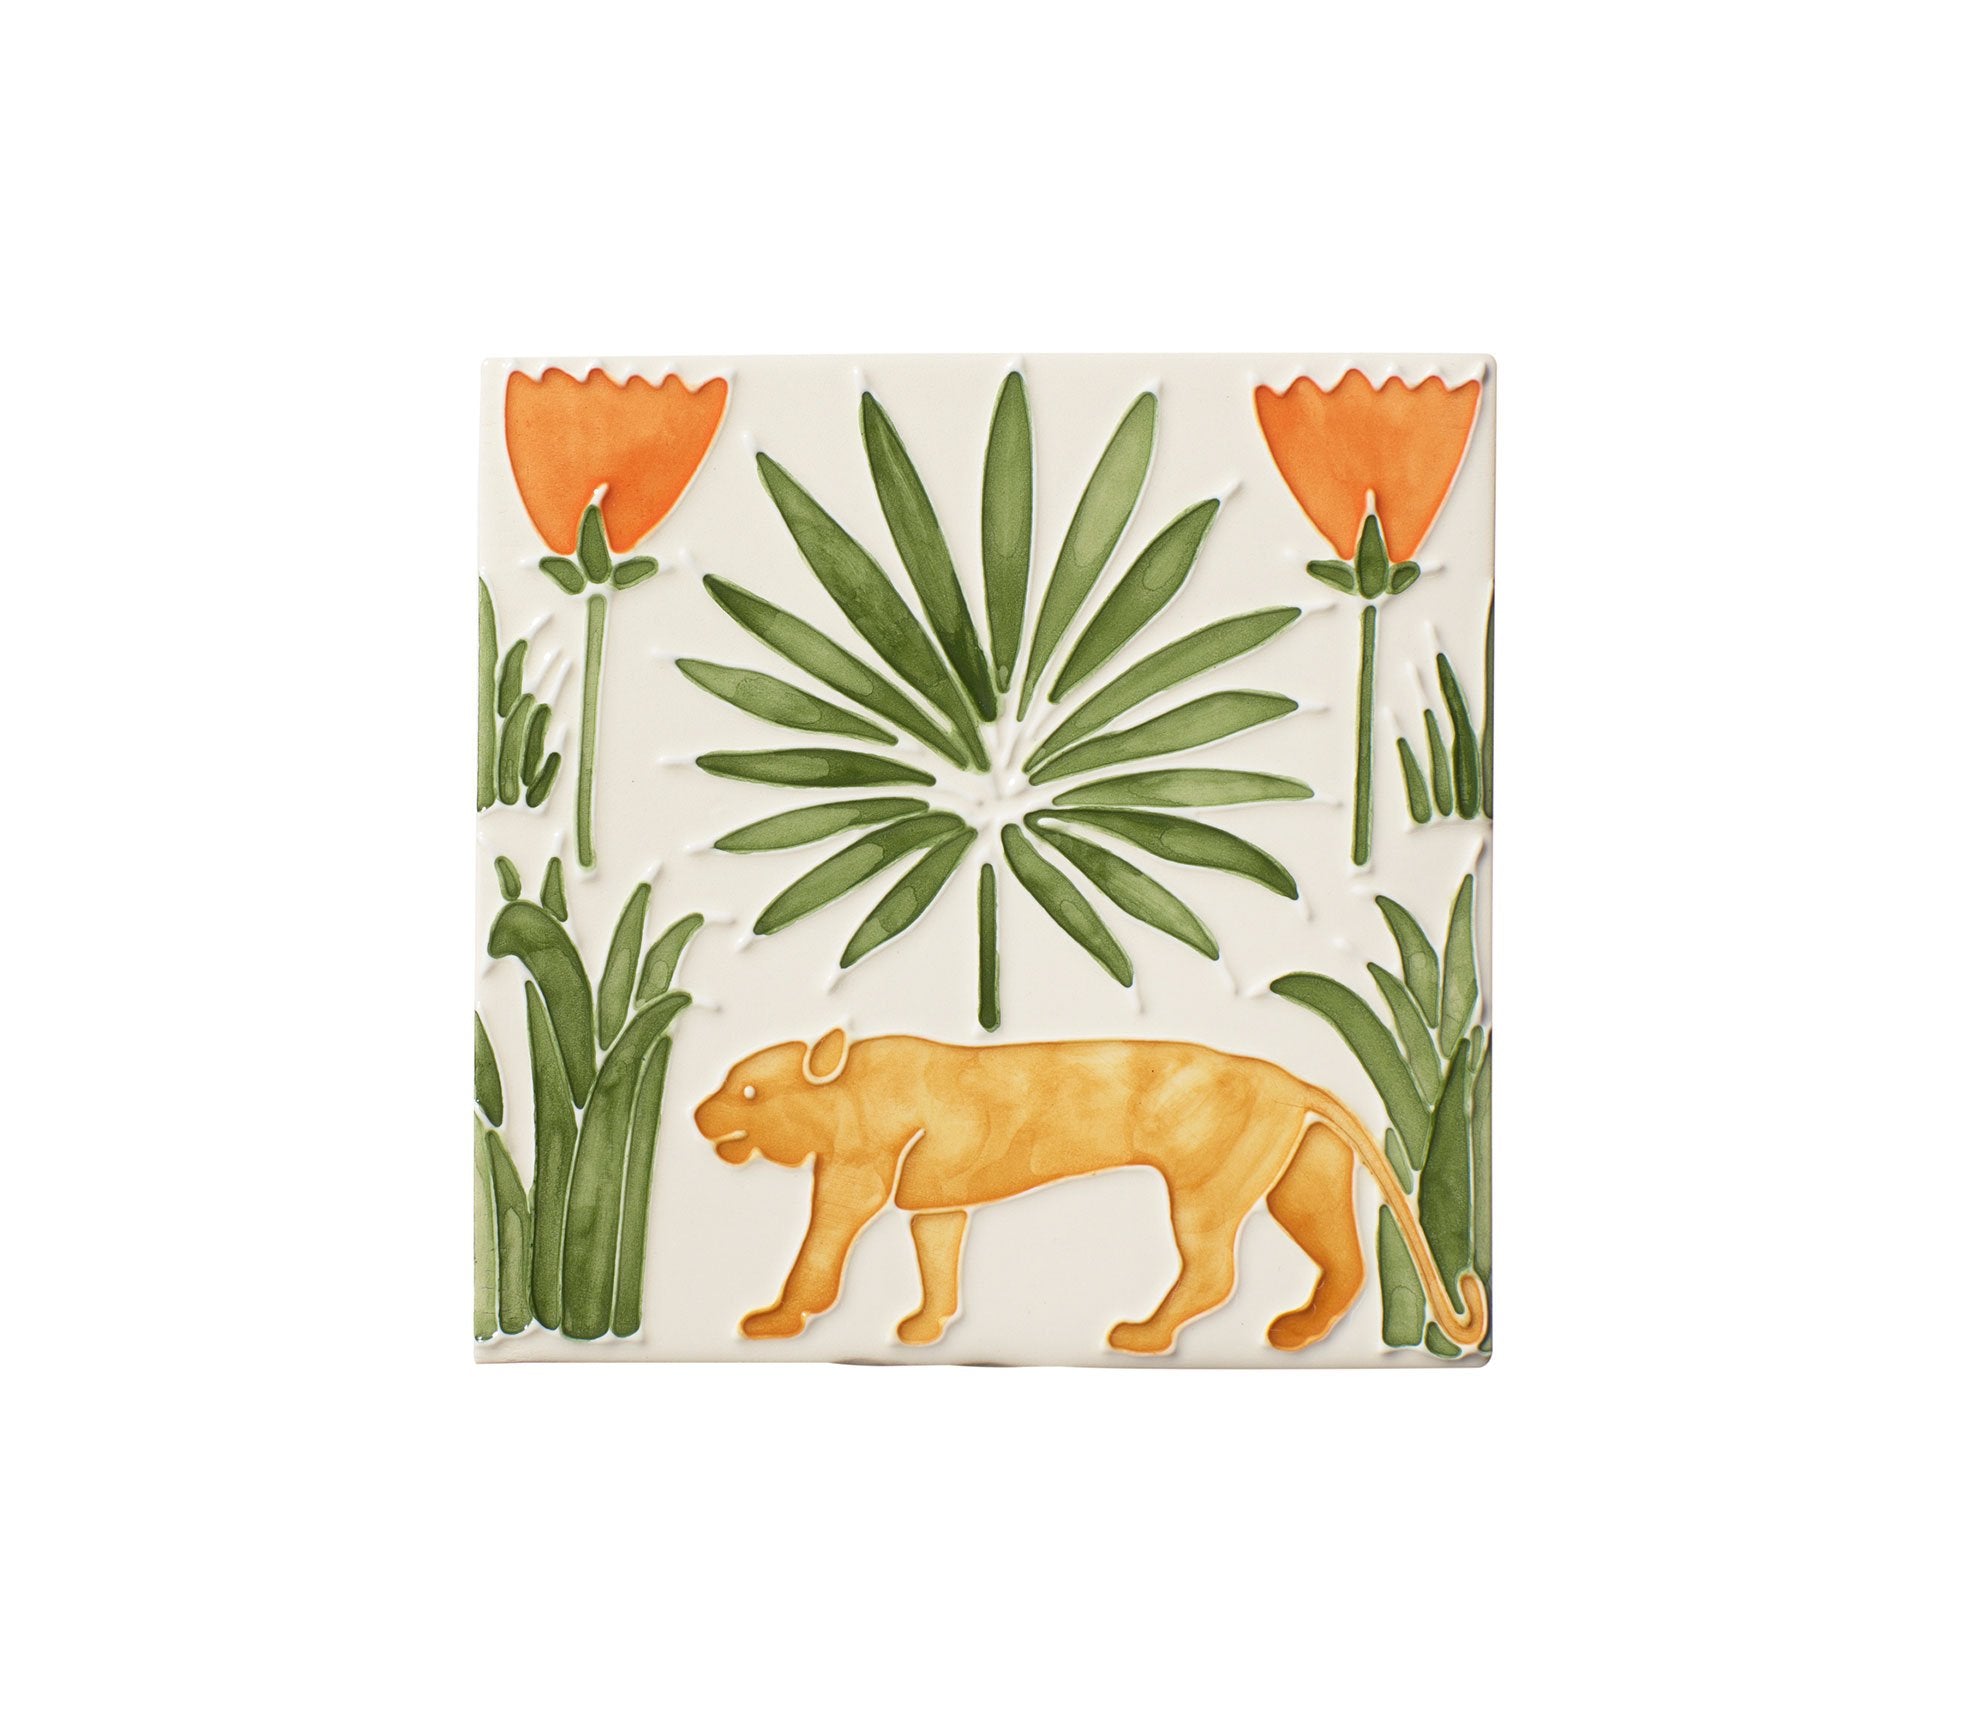 Lioness & Palms Tiles Product Image 1